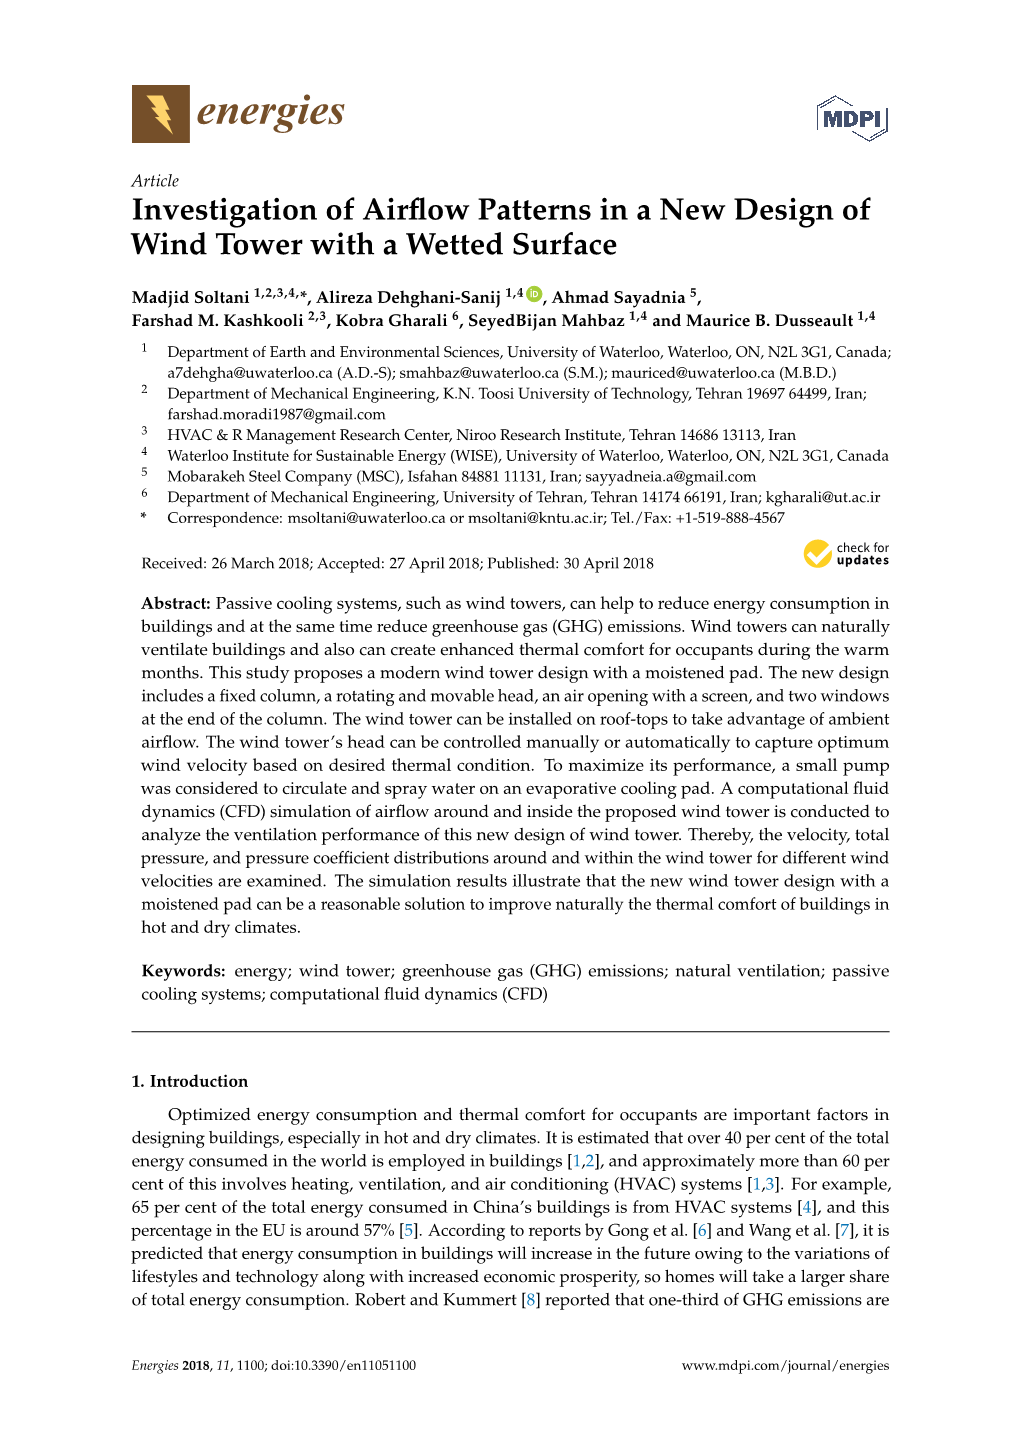 Investigation of Airflow Patterns in a New Design of Wind Tower with A